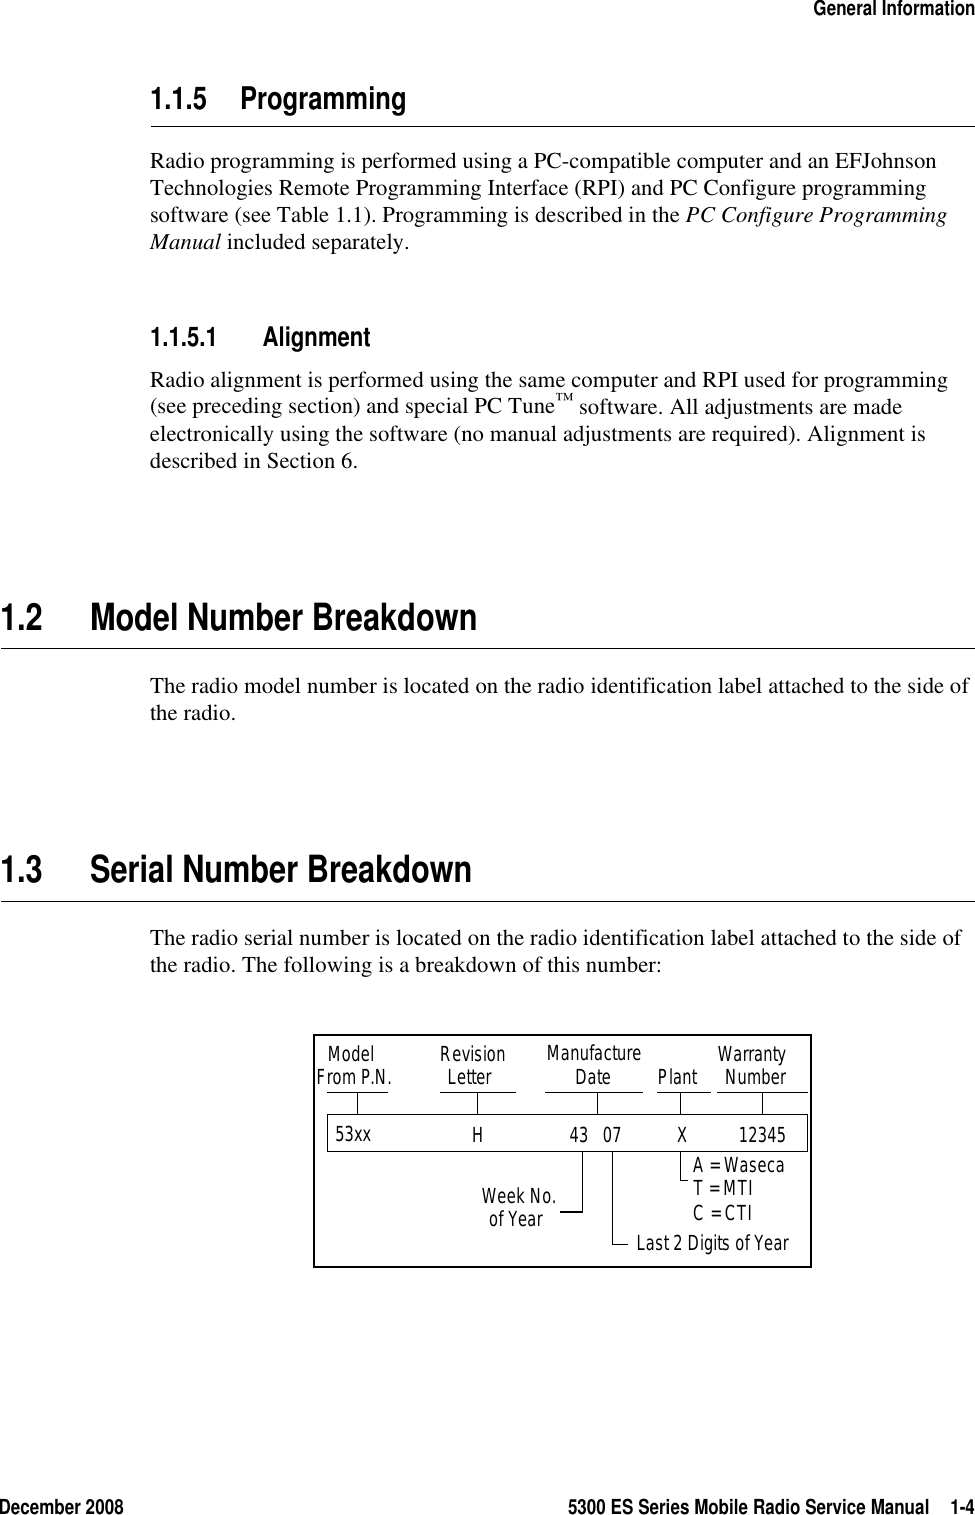 December 2008 5300 ES Series Mobile Radio Service Manual 1-4General Information1.1.5 ProgrammingRadio programming is performed using a PC-compatible computer and an EFJohnson Technologies Remote Programming Interface (RPI) and PC Configure programming software (see Table 1.1). Programming is described in the PC Configure Programming Manual included separately. 1.1.5.1 AlignmentRadio alignment is performed using the same computer and RPI used for programming (see preceding section) and special PC Tune™ software. All adjustments are made electronically using the software (no manual adjustments are required). Alignment is described in Section 6.1.2 Model Number BreakdownThe radio model number is located on the radio identification label attached to the side of the radio.1.3 Serial Number BreakdownThe radio serial number is located on the radio identification label attached to the side of the radio. The following is a breakdown of this number:53xx   Model RevisionLetter ManufactureDate WarrantyNumberWeek No.of Year Last 2 Digits of YearT = MTI PlantFrom P.N.A = WasecaC = CTI12345 X 43   07 H